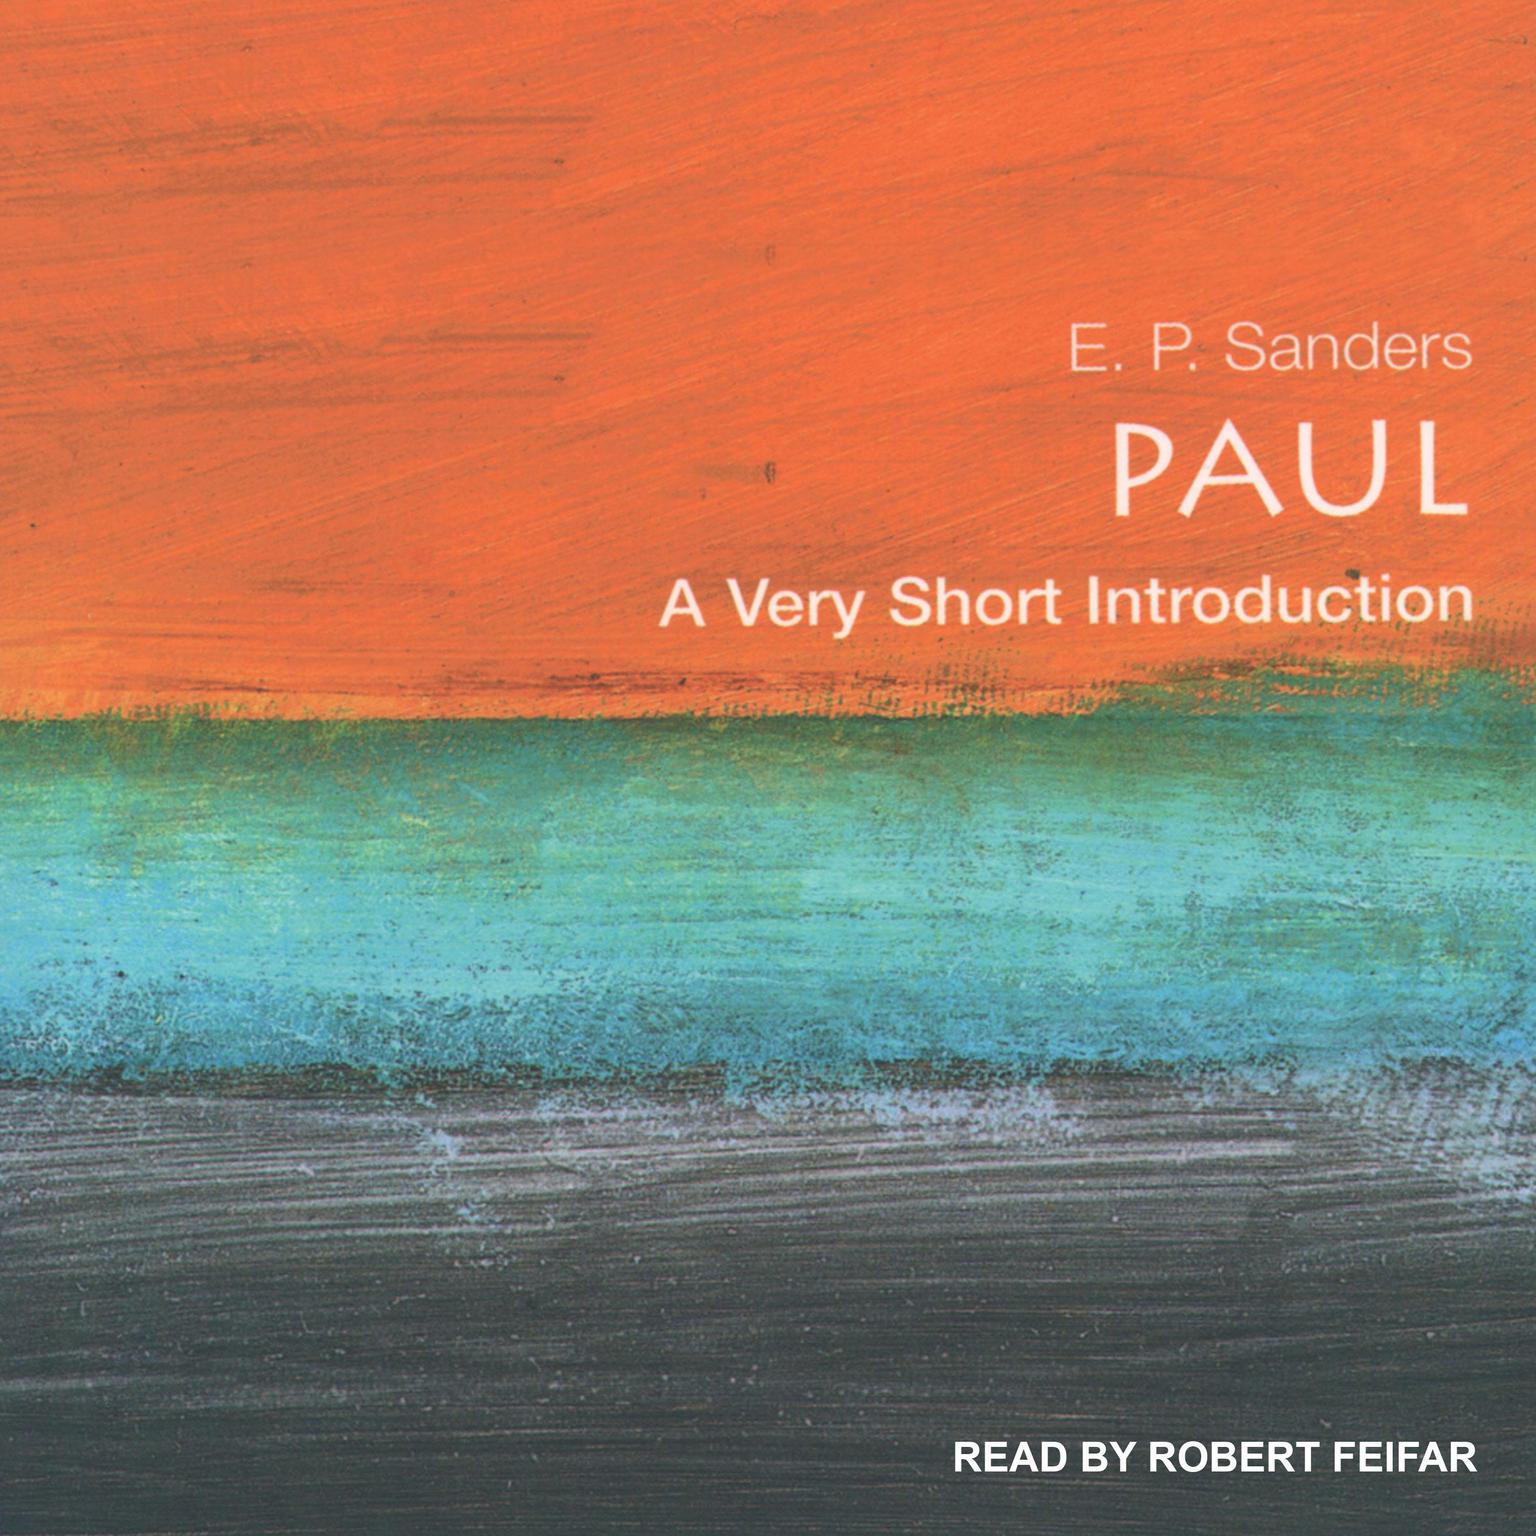 Paul: A Very Short Introduction Audiobook, by E.P. Sanders